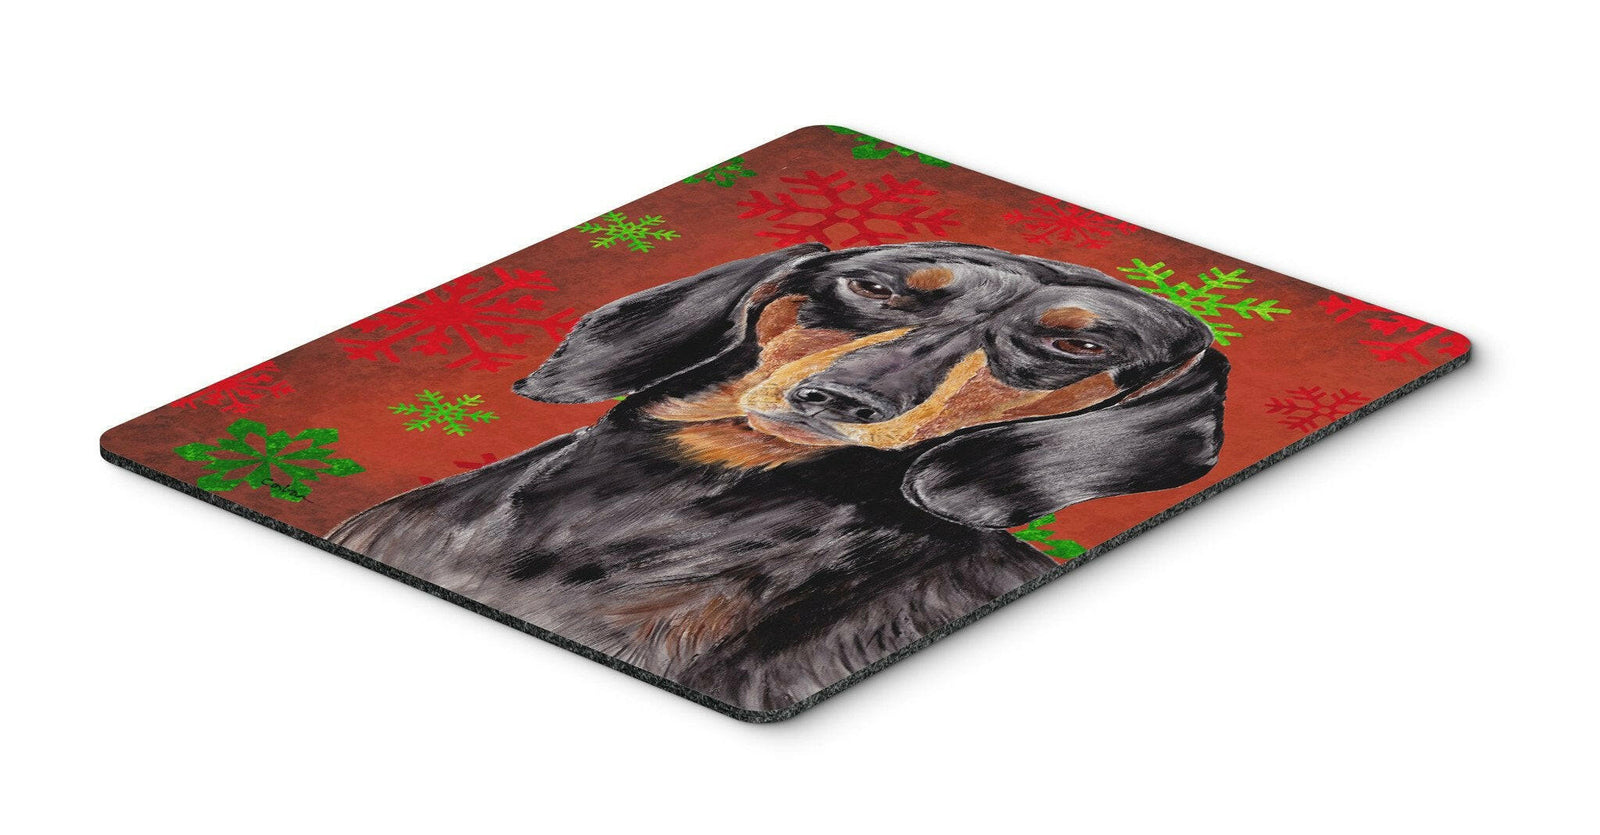 Dachshund Red and Green Snowflakes Holiday Christmas Mouse Pad, Hot Pad Trivet by Caroline's Treasures